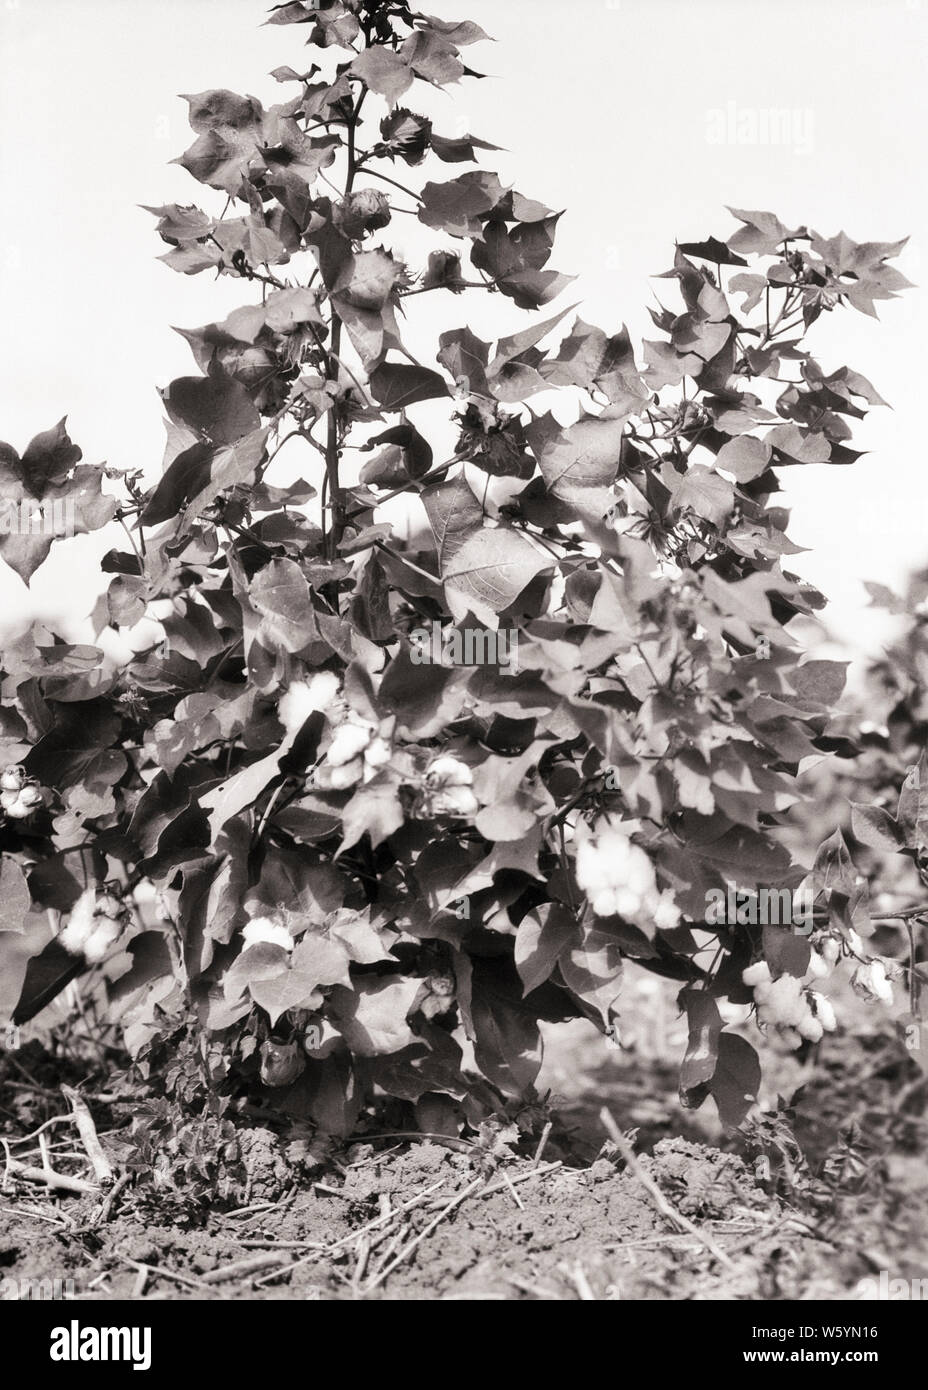 1930s COTTON PLANT Gossypium BOLLS BURST OPEN READY TO BE HARVESTED AND PICKED LOUISIANA USA - c6308 HAR001 HARS OLD FASHIONED Stock Photo